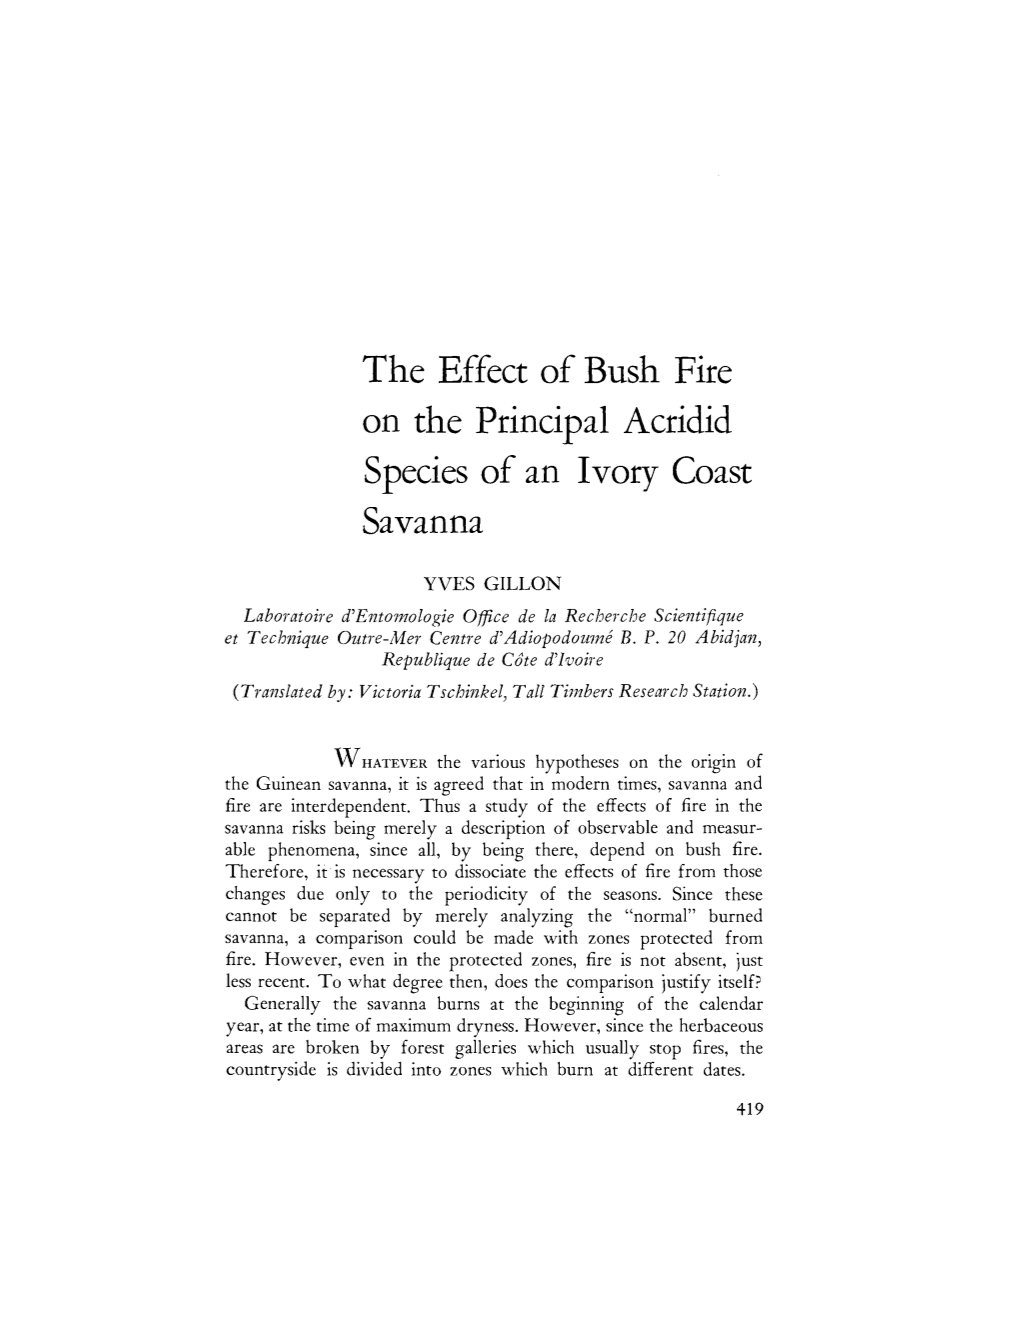 The Effect of Bush Fire on the Principal Acridid Species of an Ivory Coast Savanna